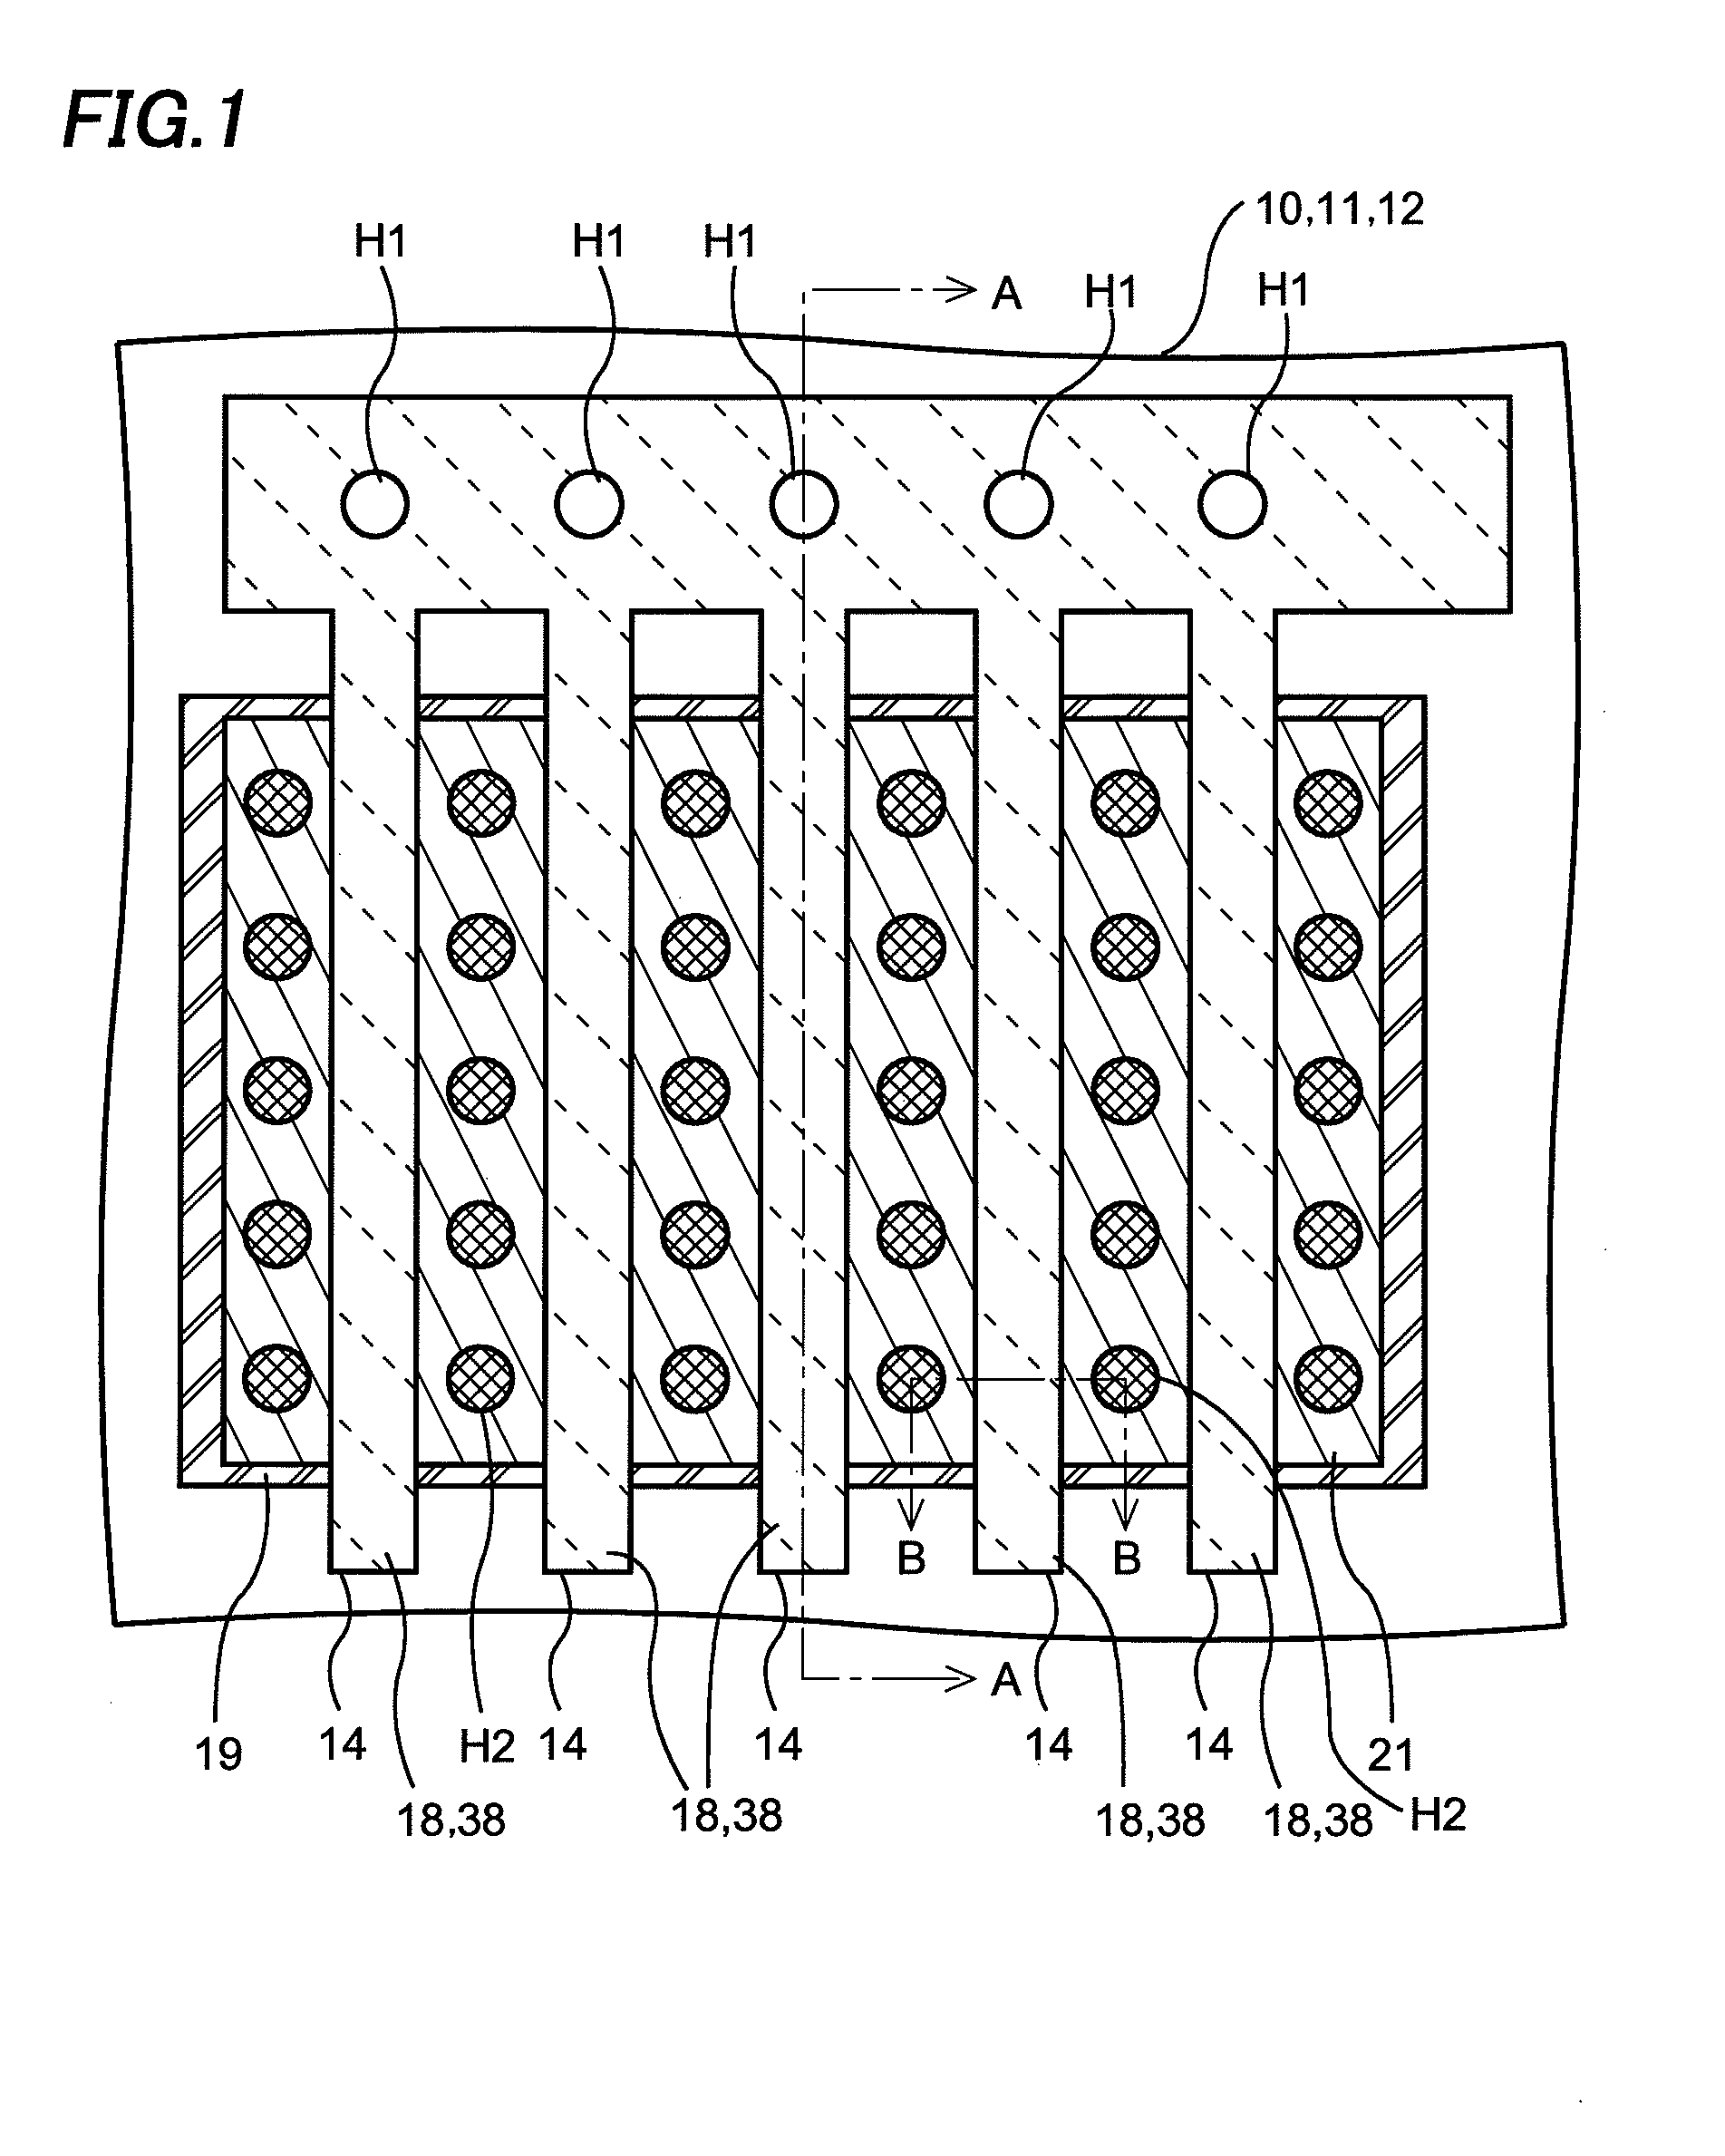 Trench gate type transistor